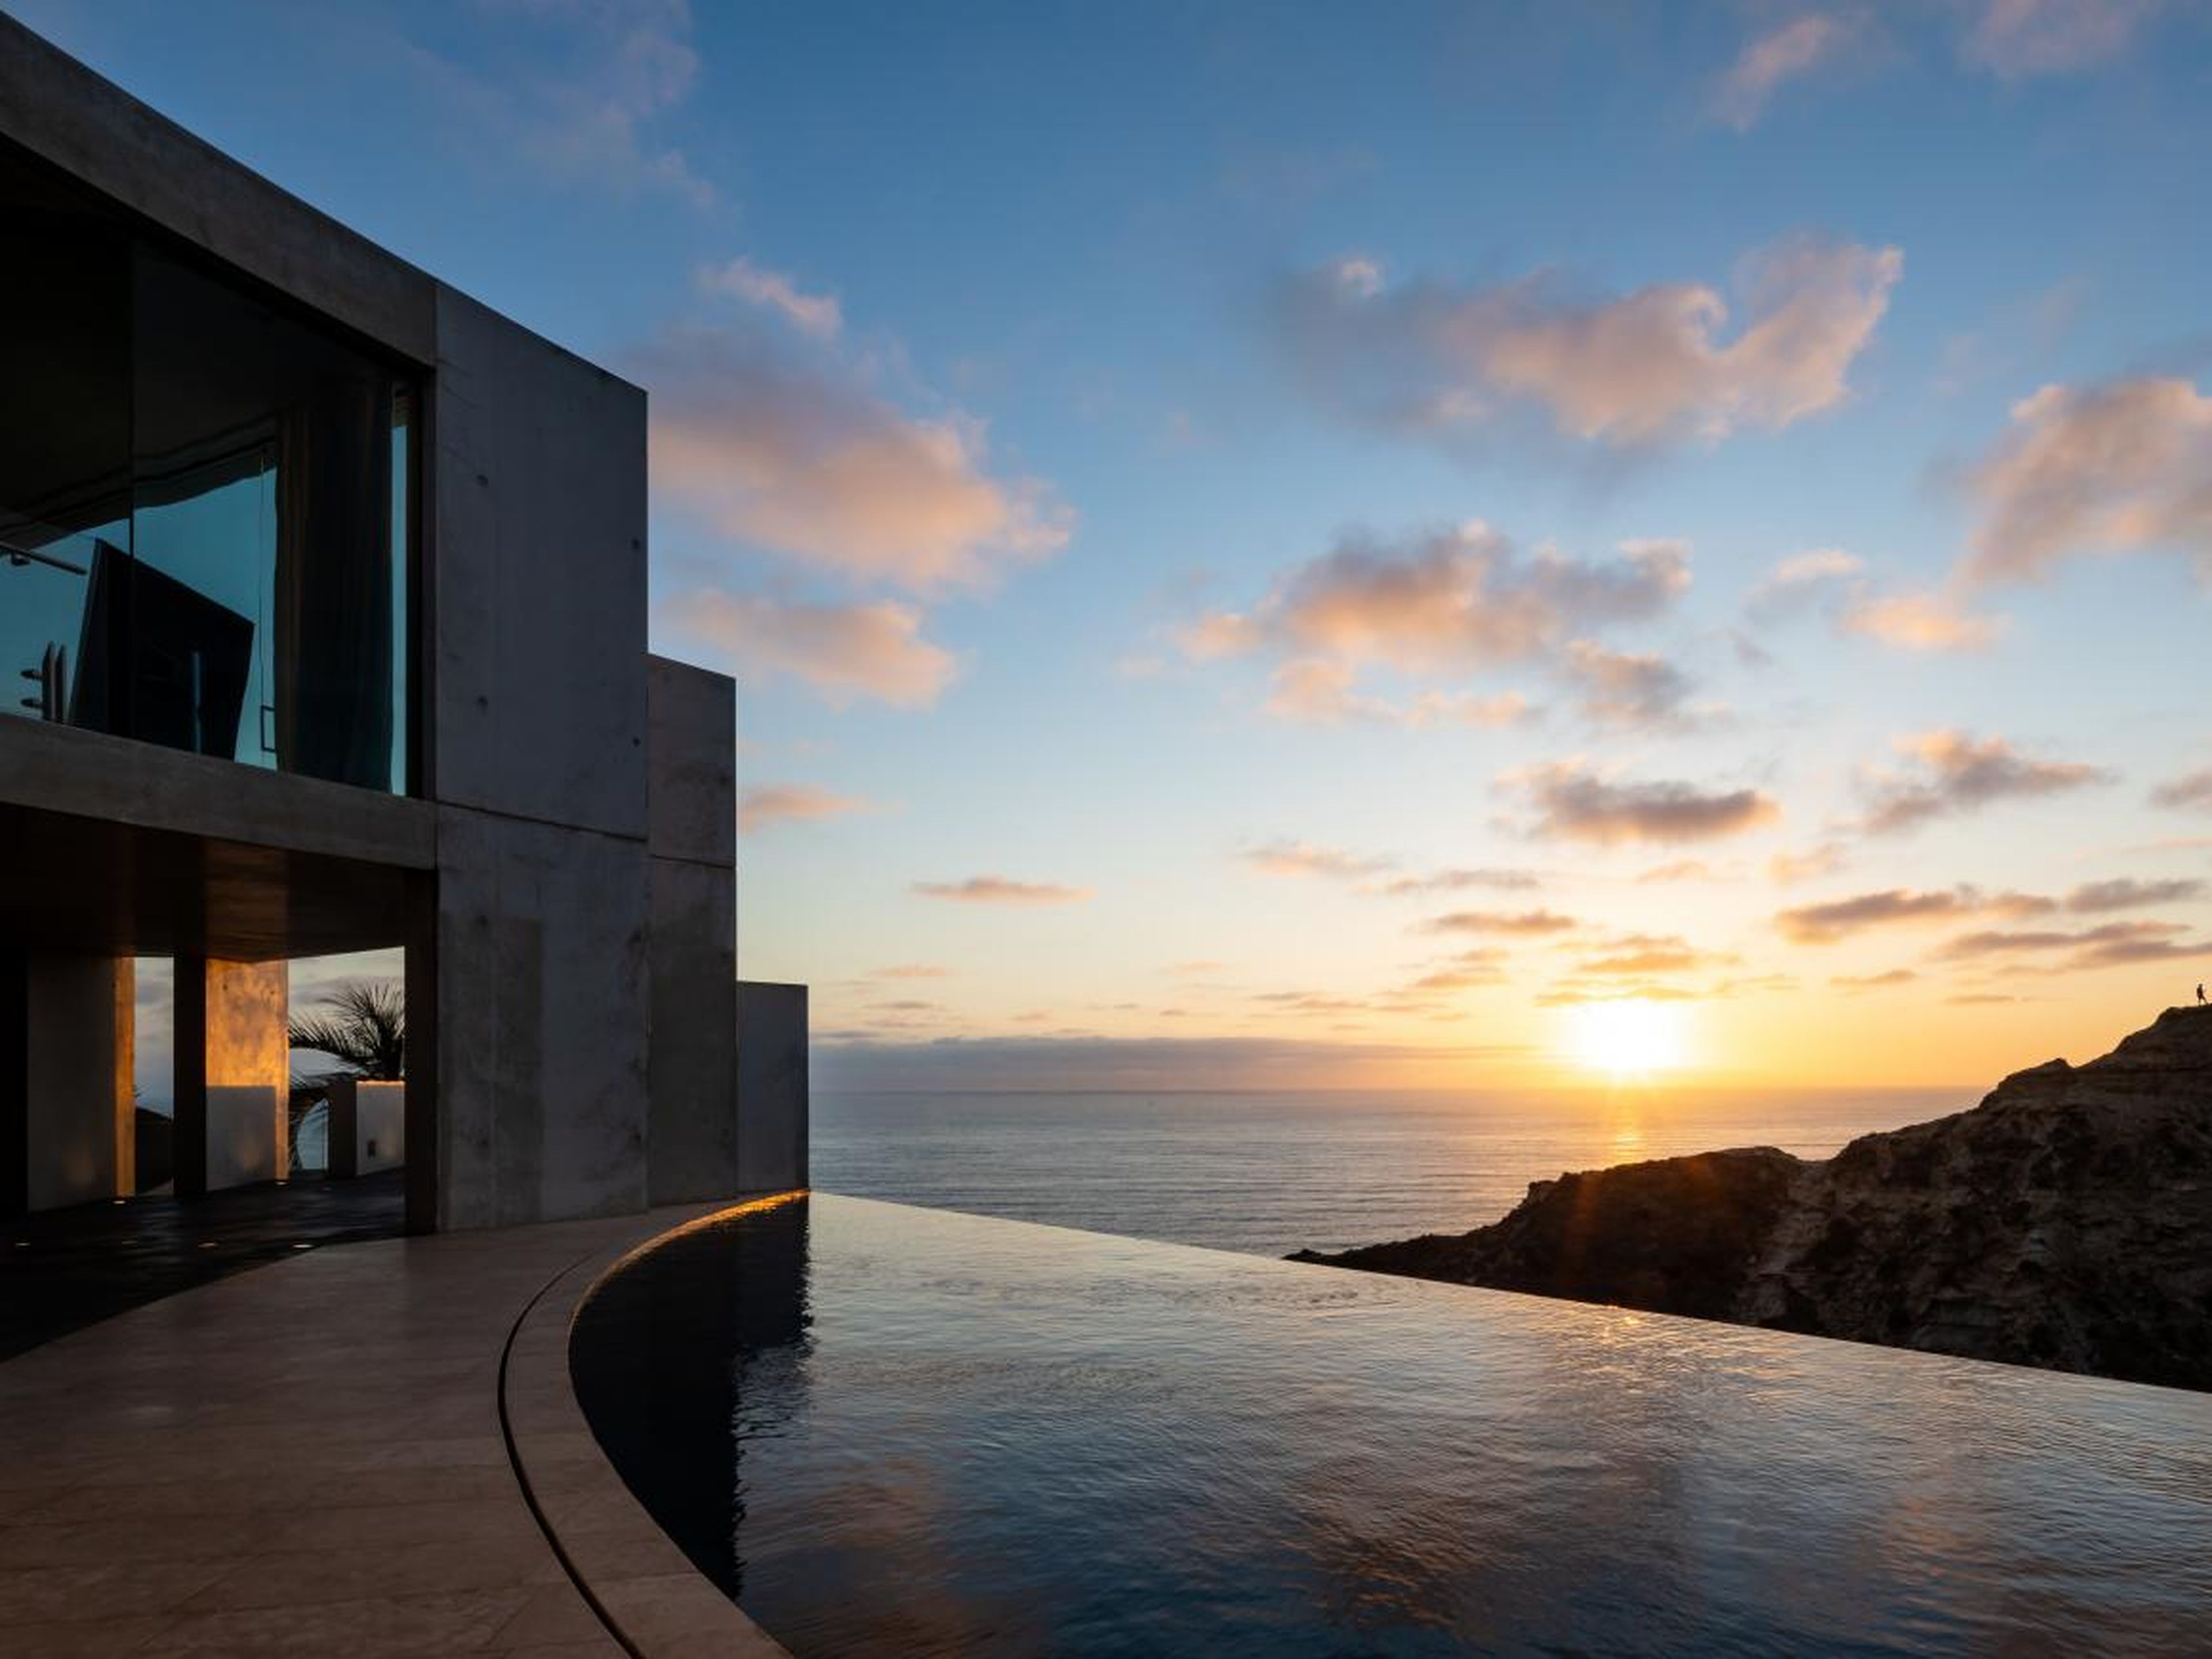 The curving infinity pool gives the illusion of flowing directly into the horizon.